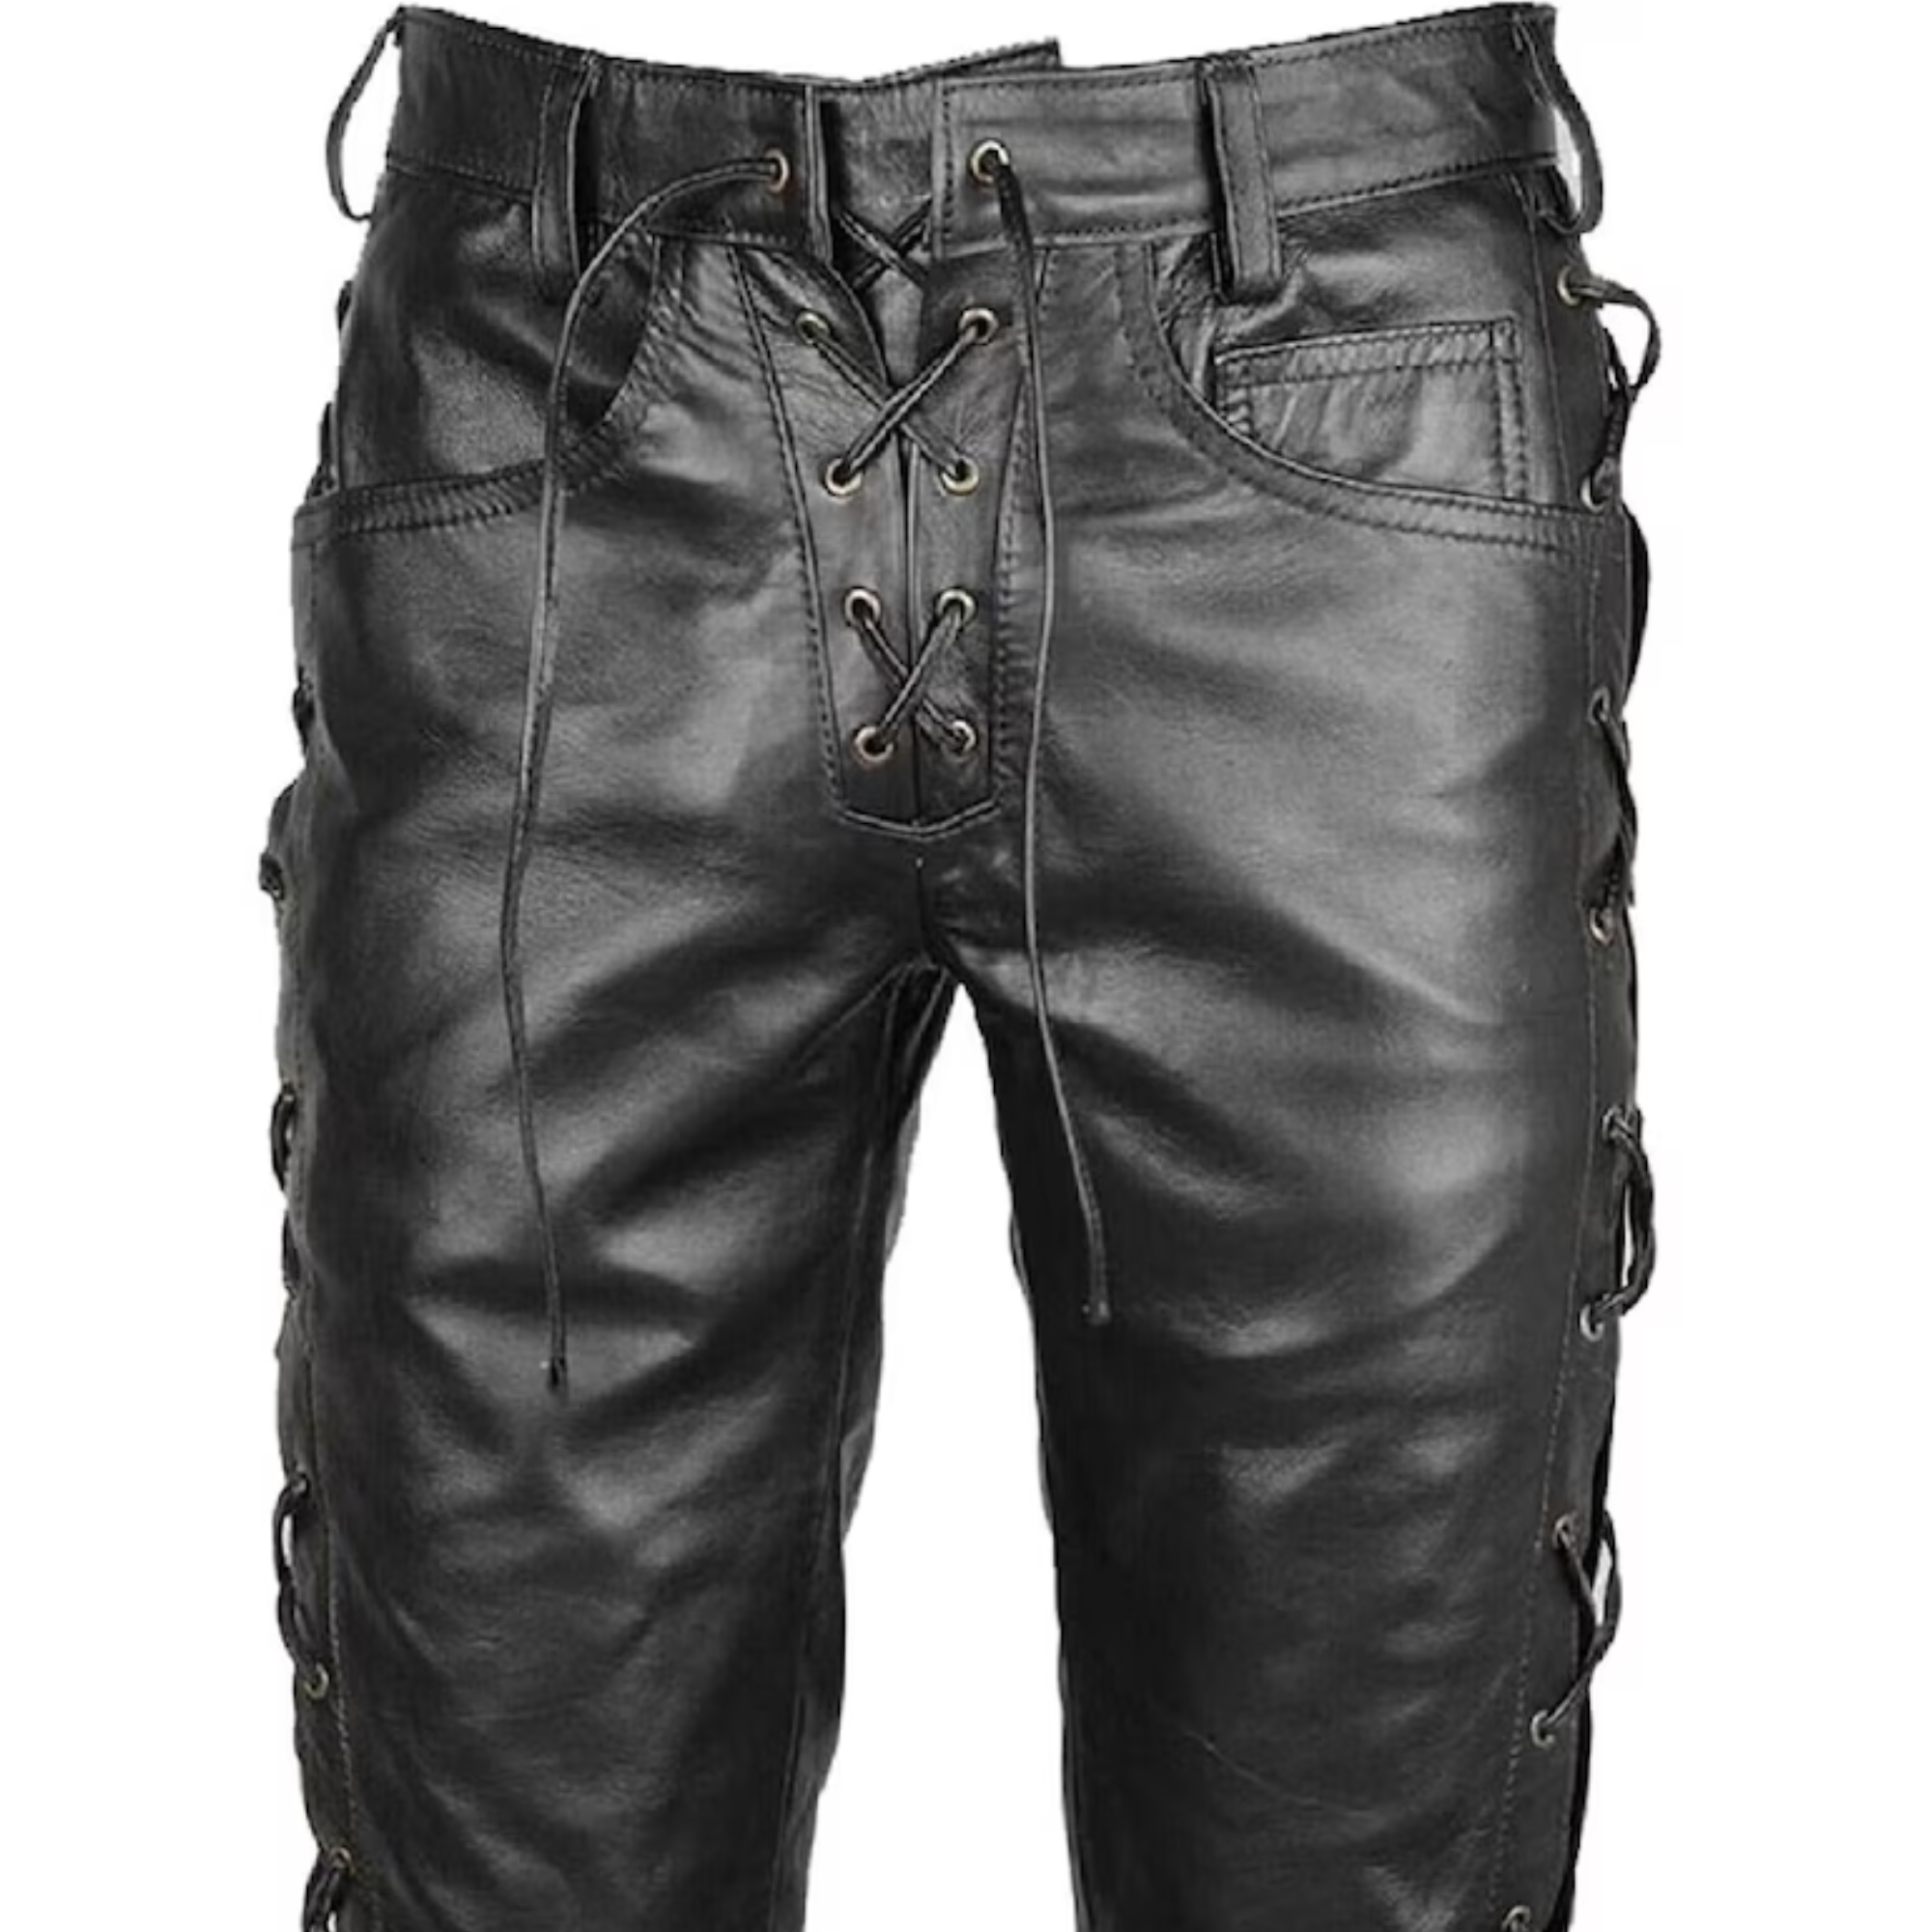 Skintan Leather Lace Sided Trousers - Dark Fashion Clothing